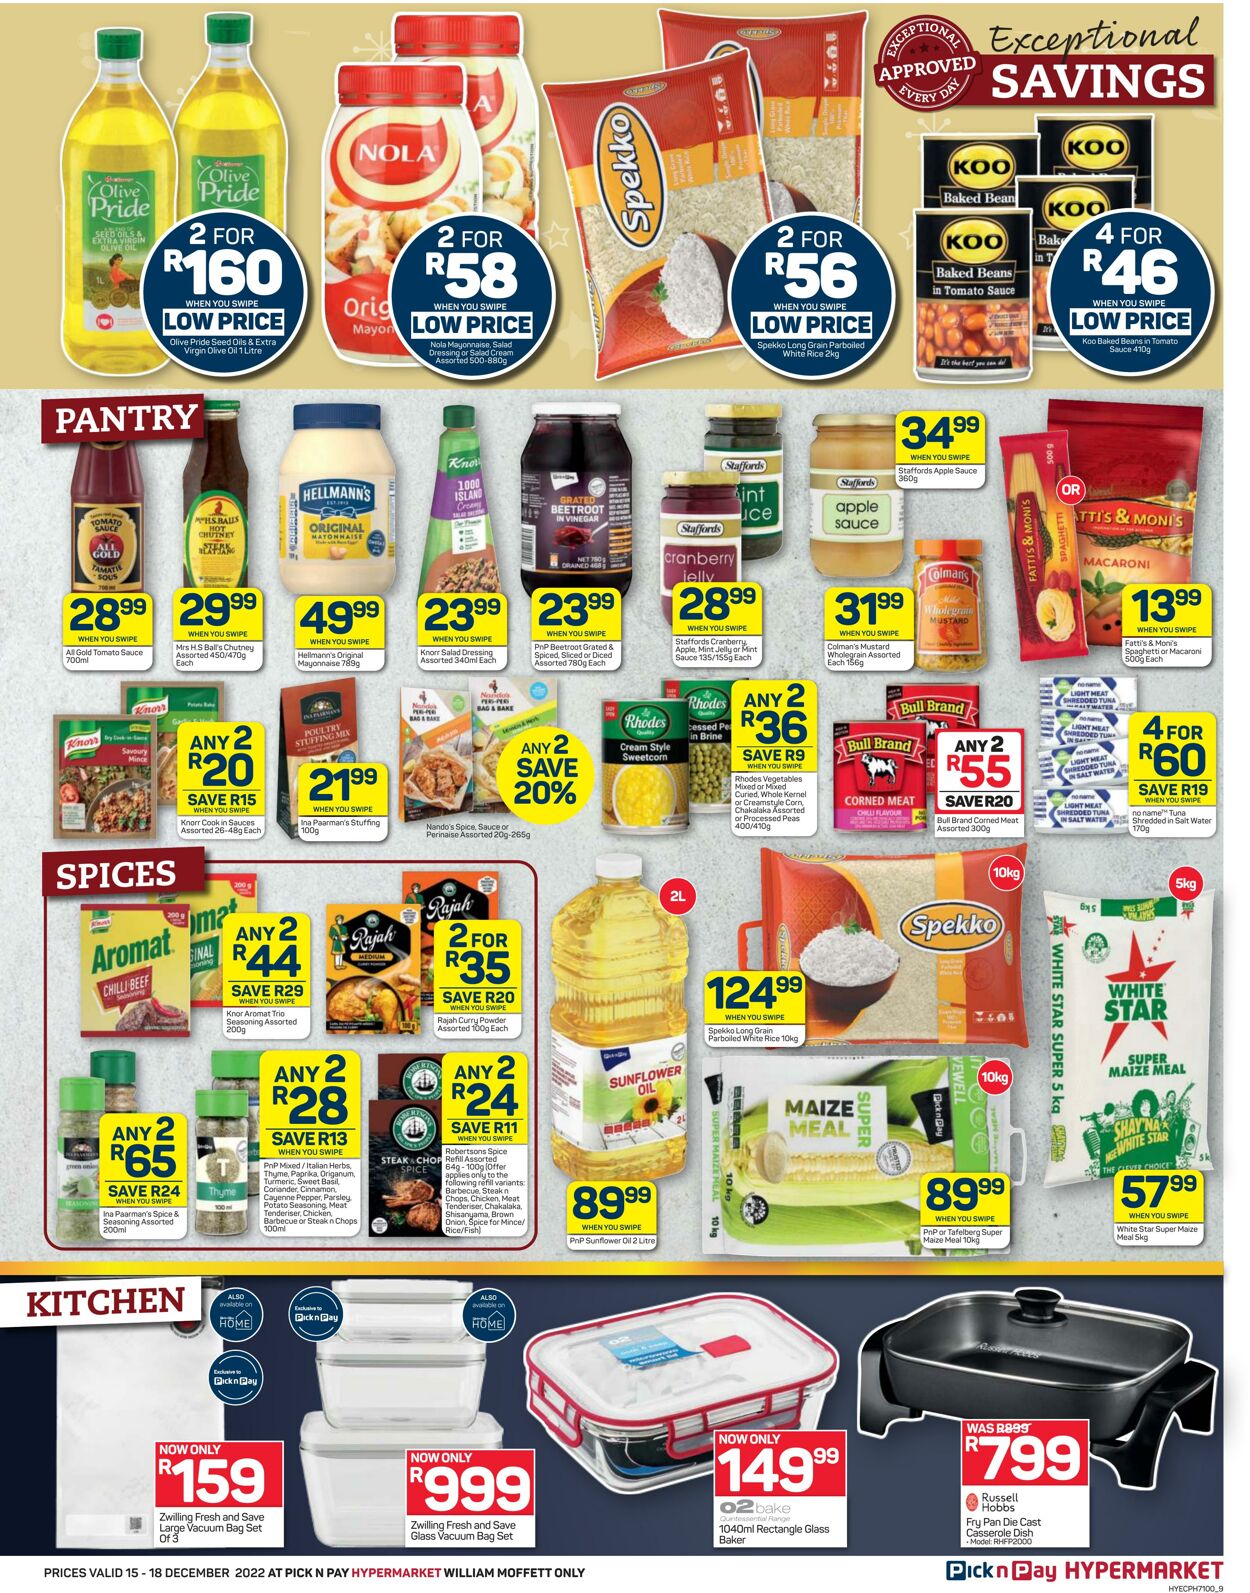 Special Pick n Pay 15.12.2022 - 18.12.2022